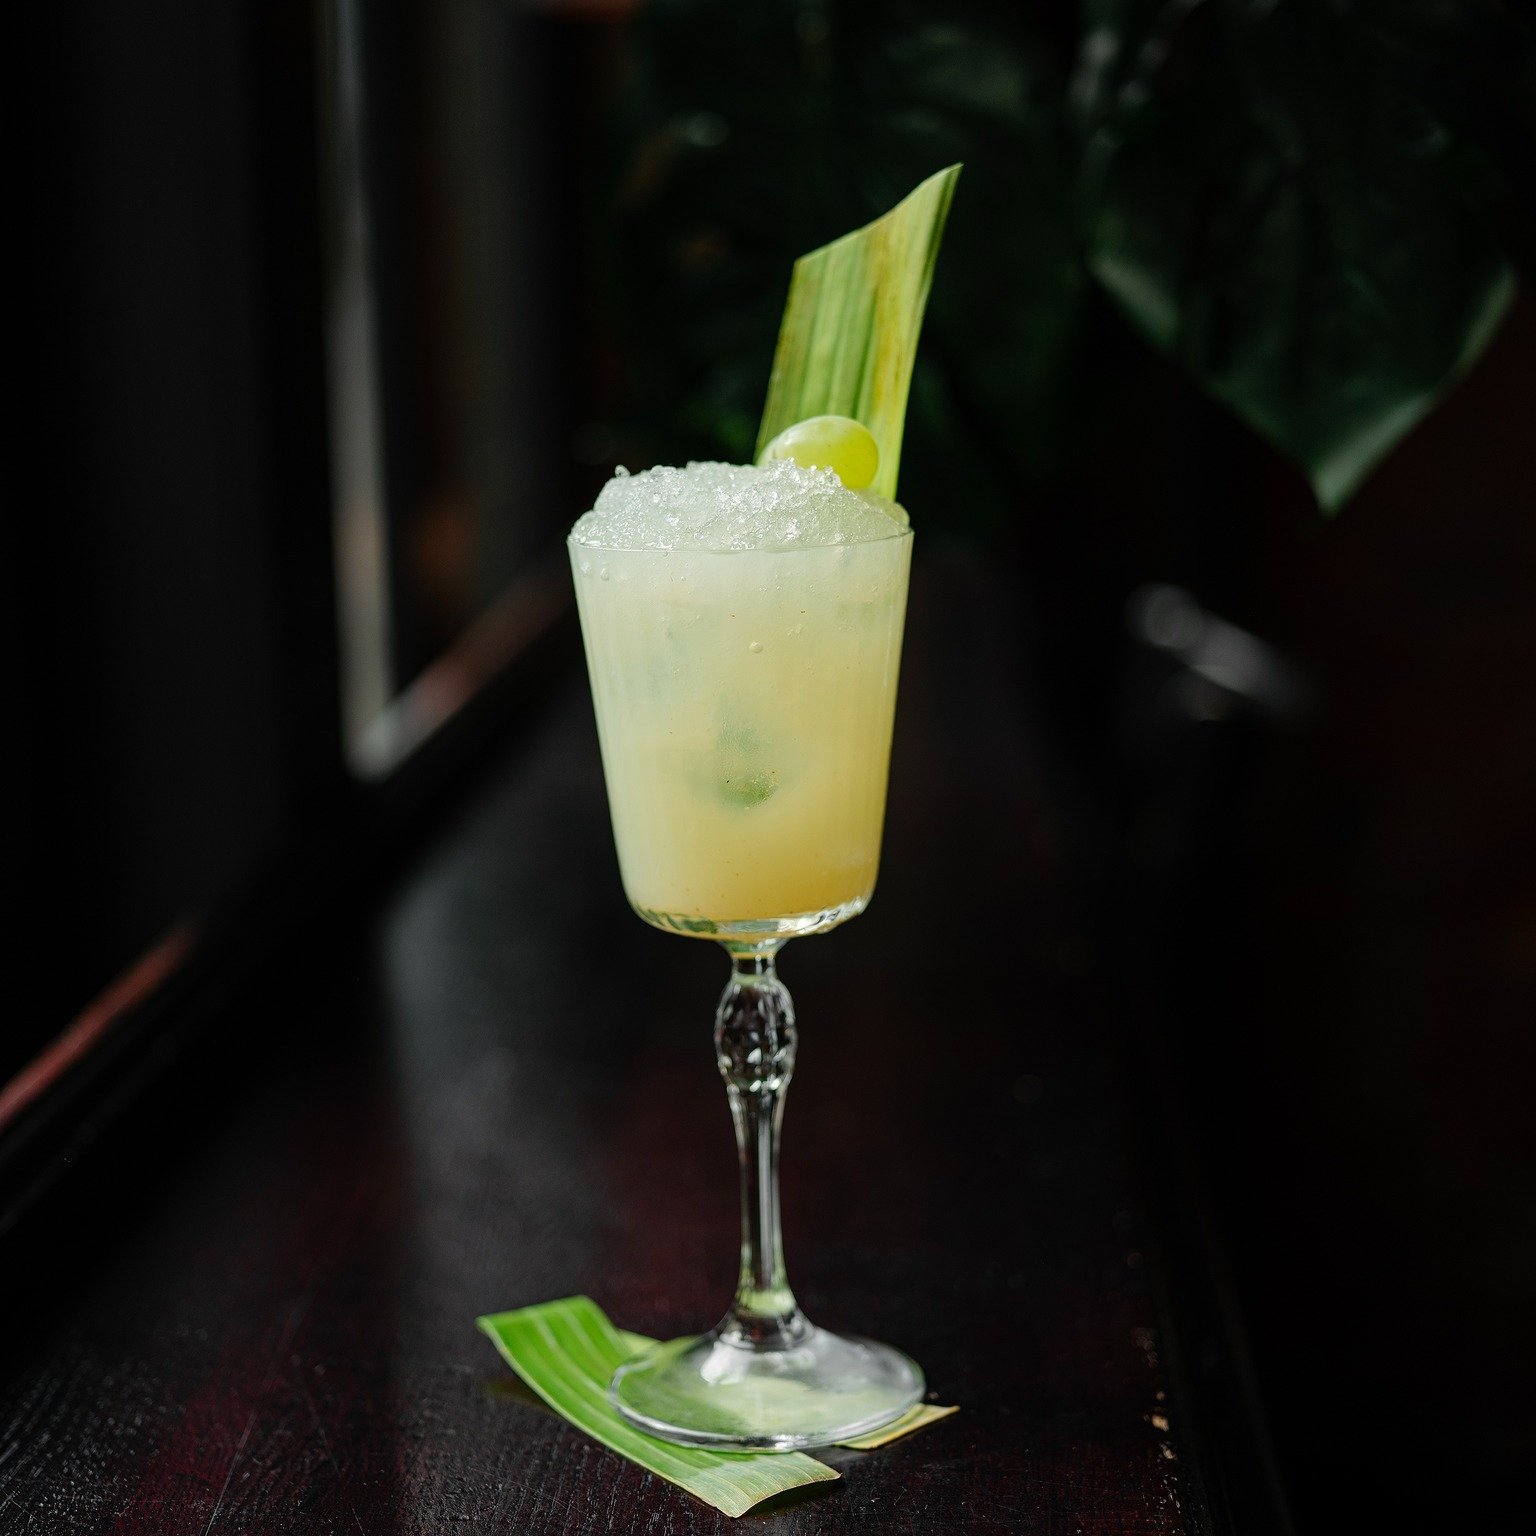 Ready for a taste of Spring? 🍸🌿💚

Our Pear On A Vine cocktail is a refreshing mix of Smirnoff vanilla vodka, Xante pear liqueur, green grapes, pear, lemon and vanilla syrup.

#tynemouth #tynemouthbars #tynemouthdrinks